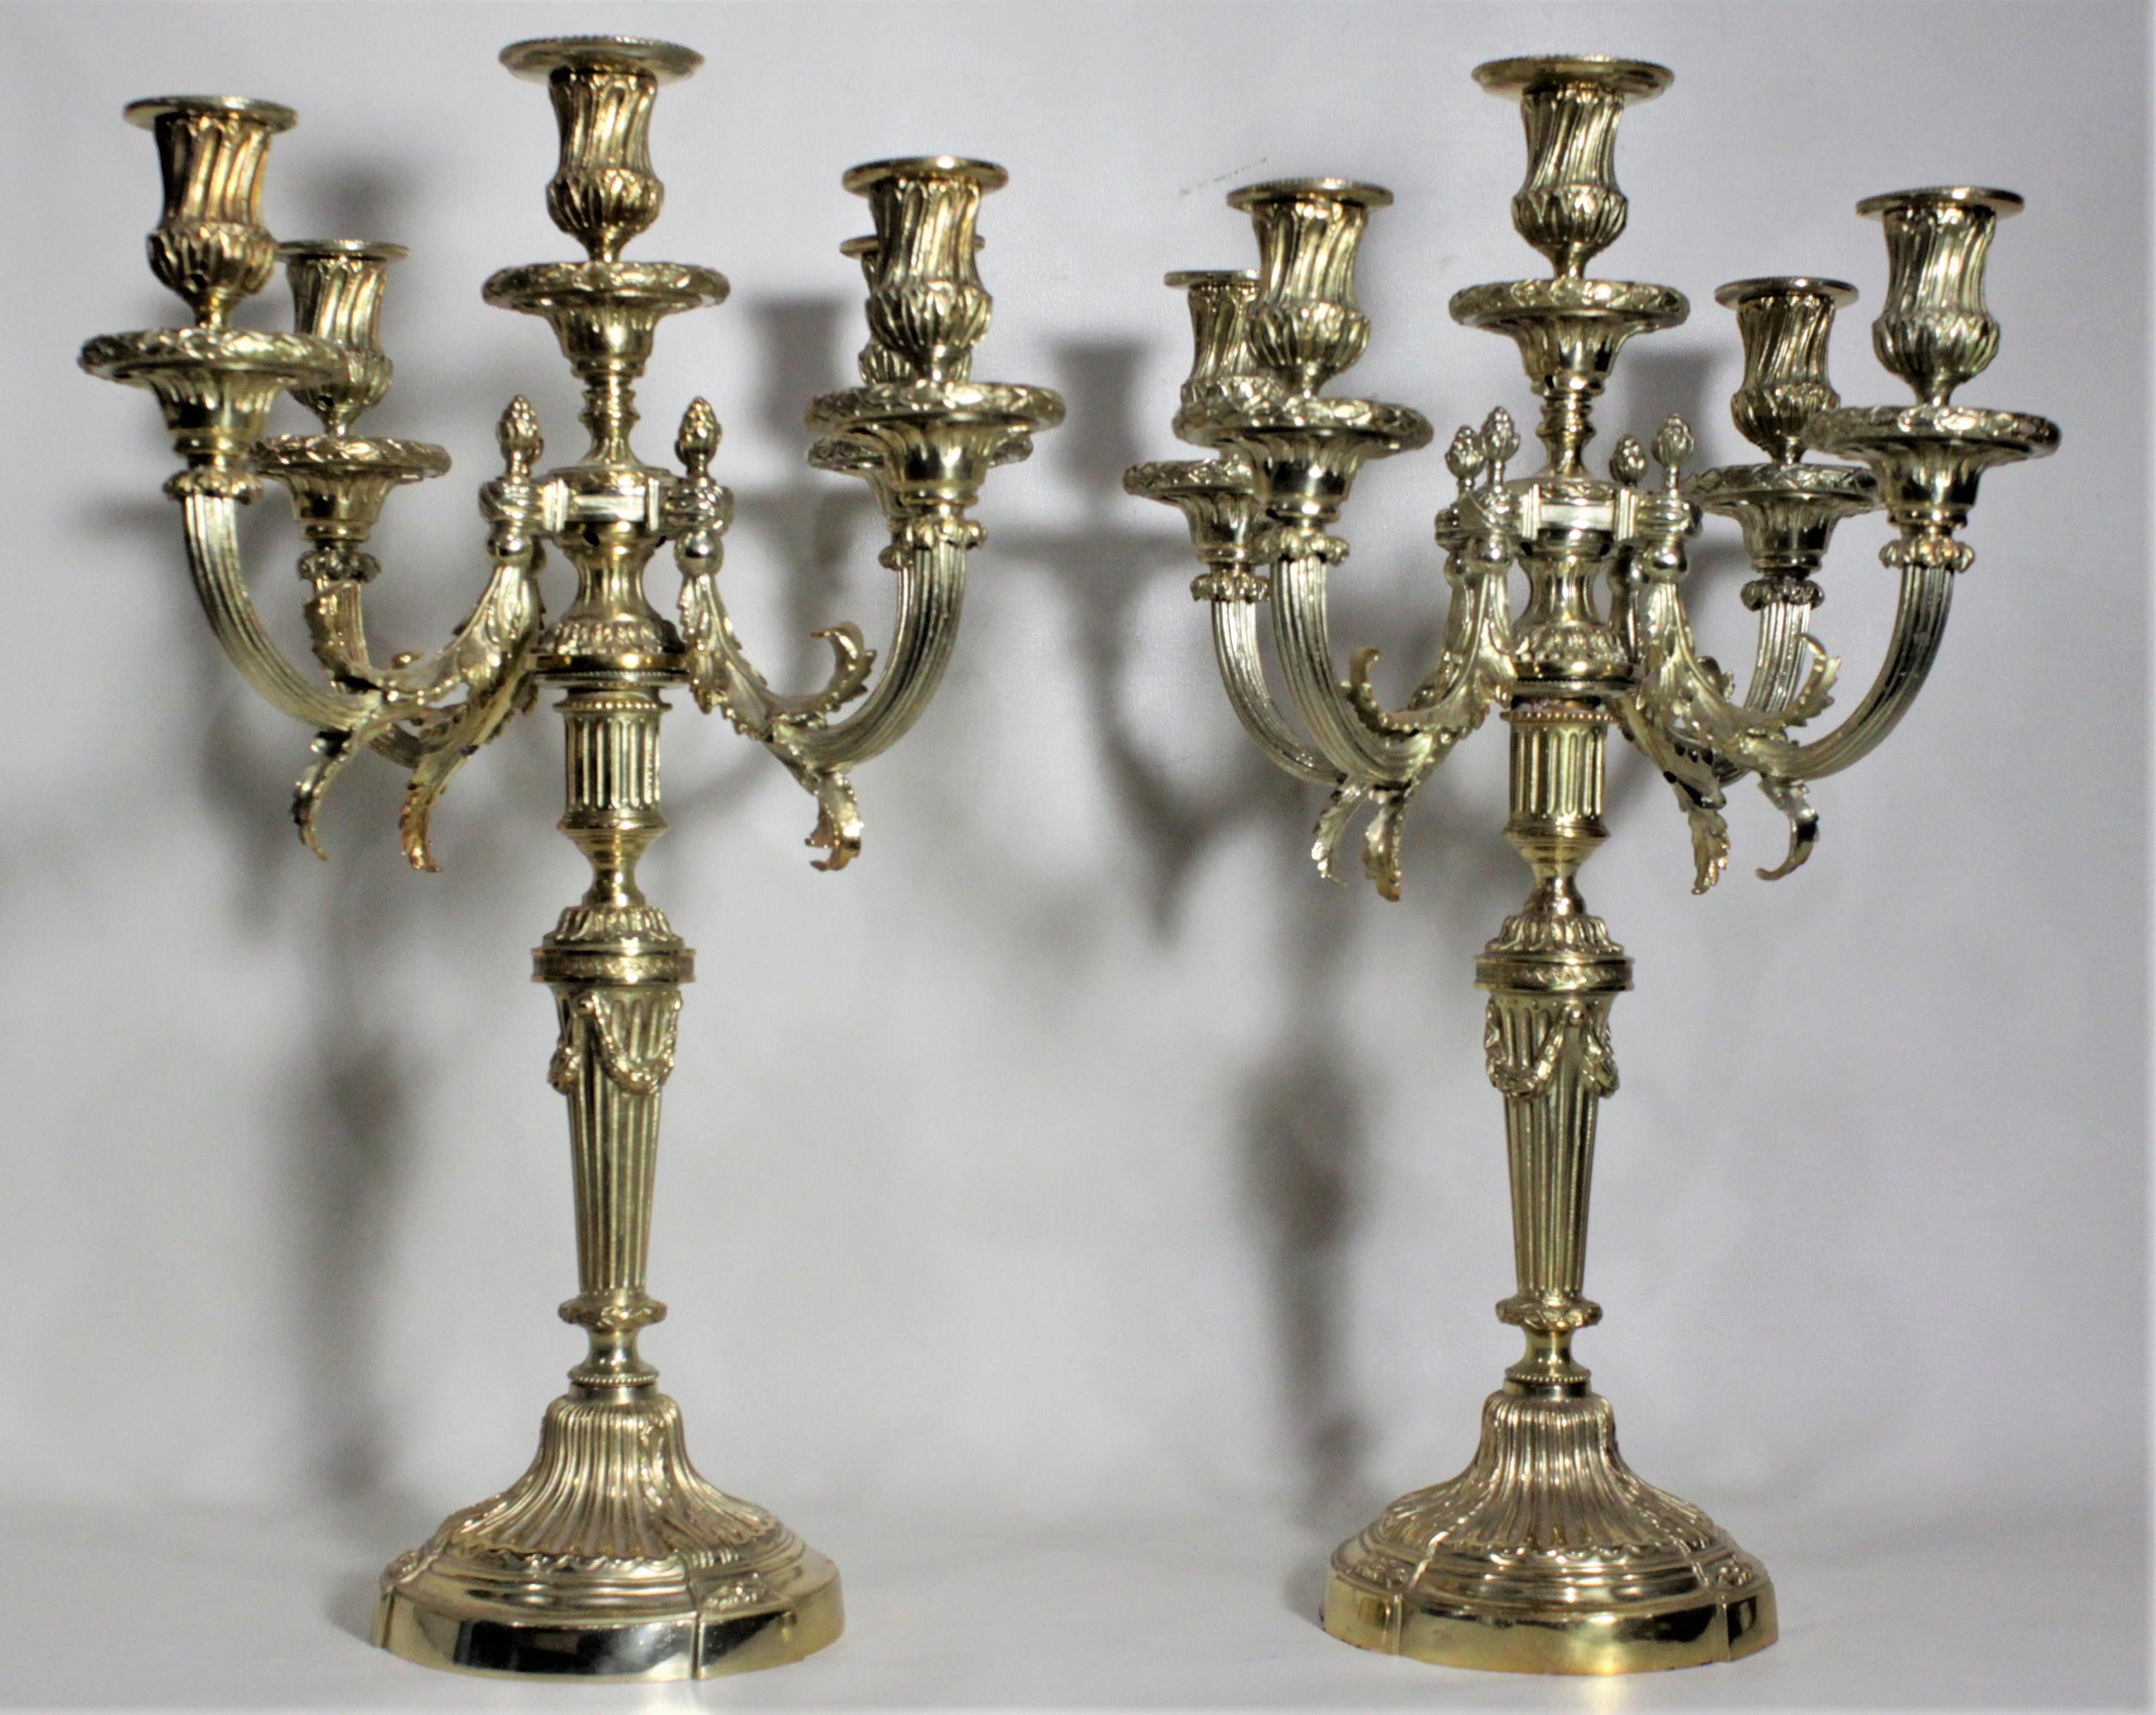 20th Century Pair of Antique Empire Style Four Branch Gilt Bronze Candelabras For Sale